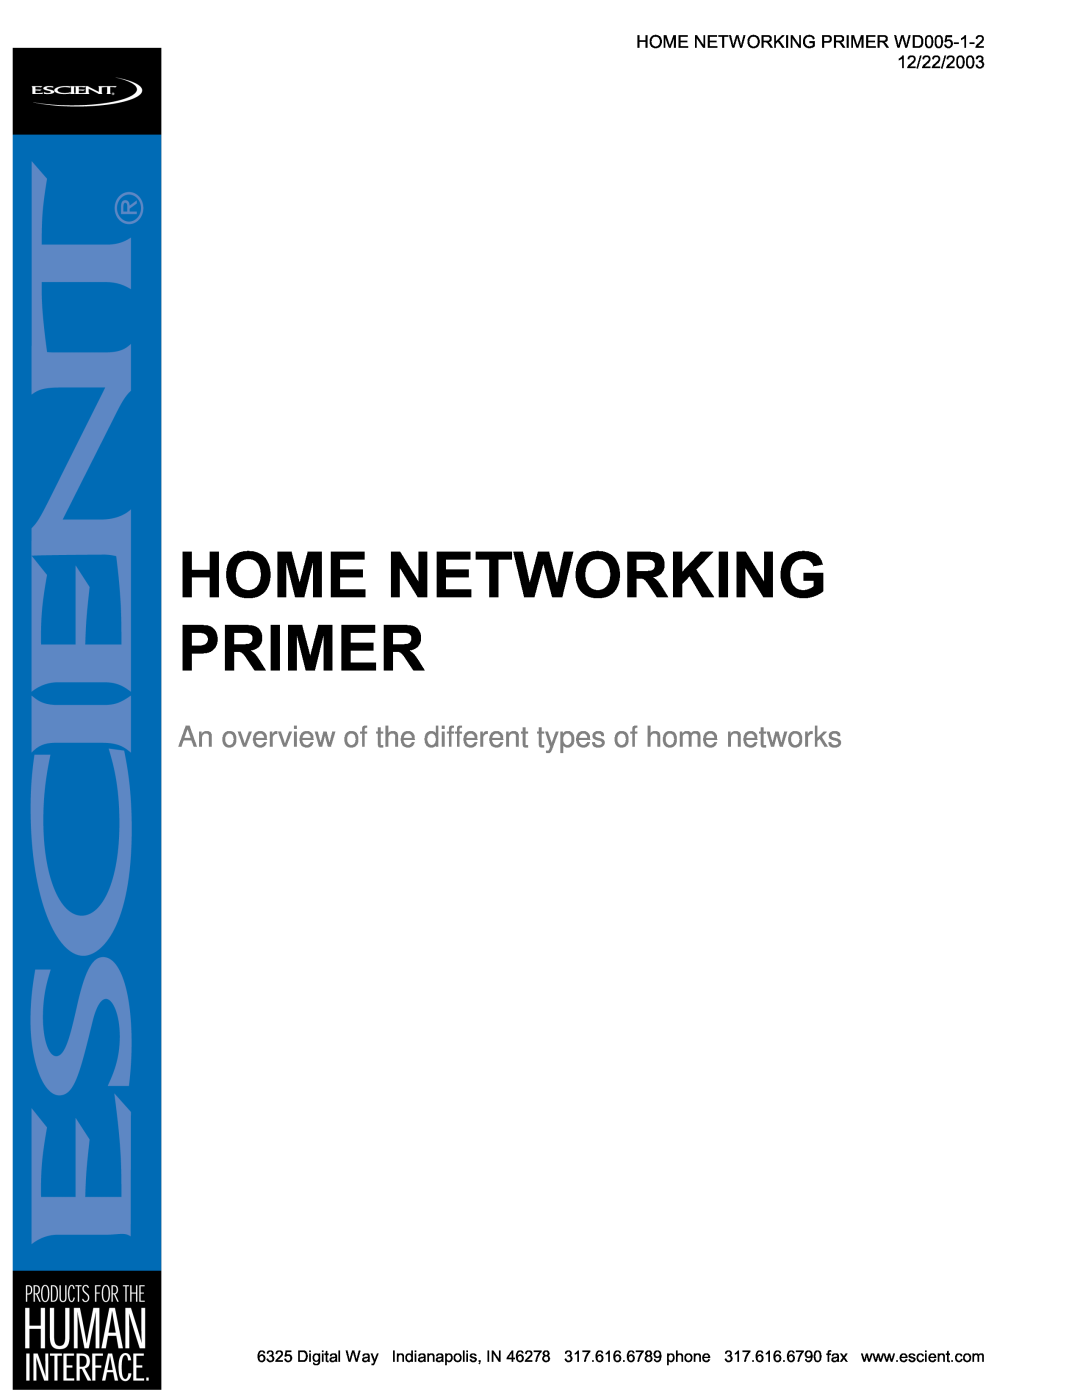 Escient MP-150 manual Home Networking Primer, HOME NETWORKING PRIMER WD005-1-212/22/2003 